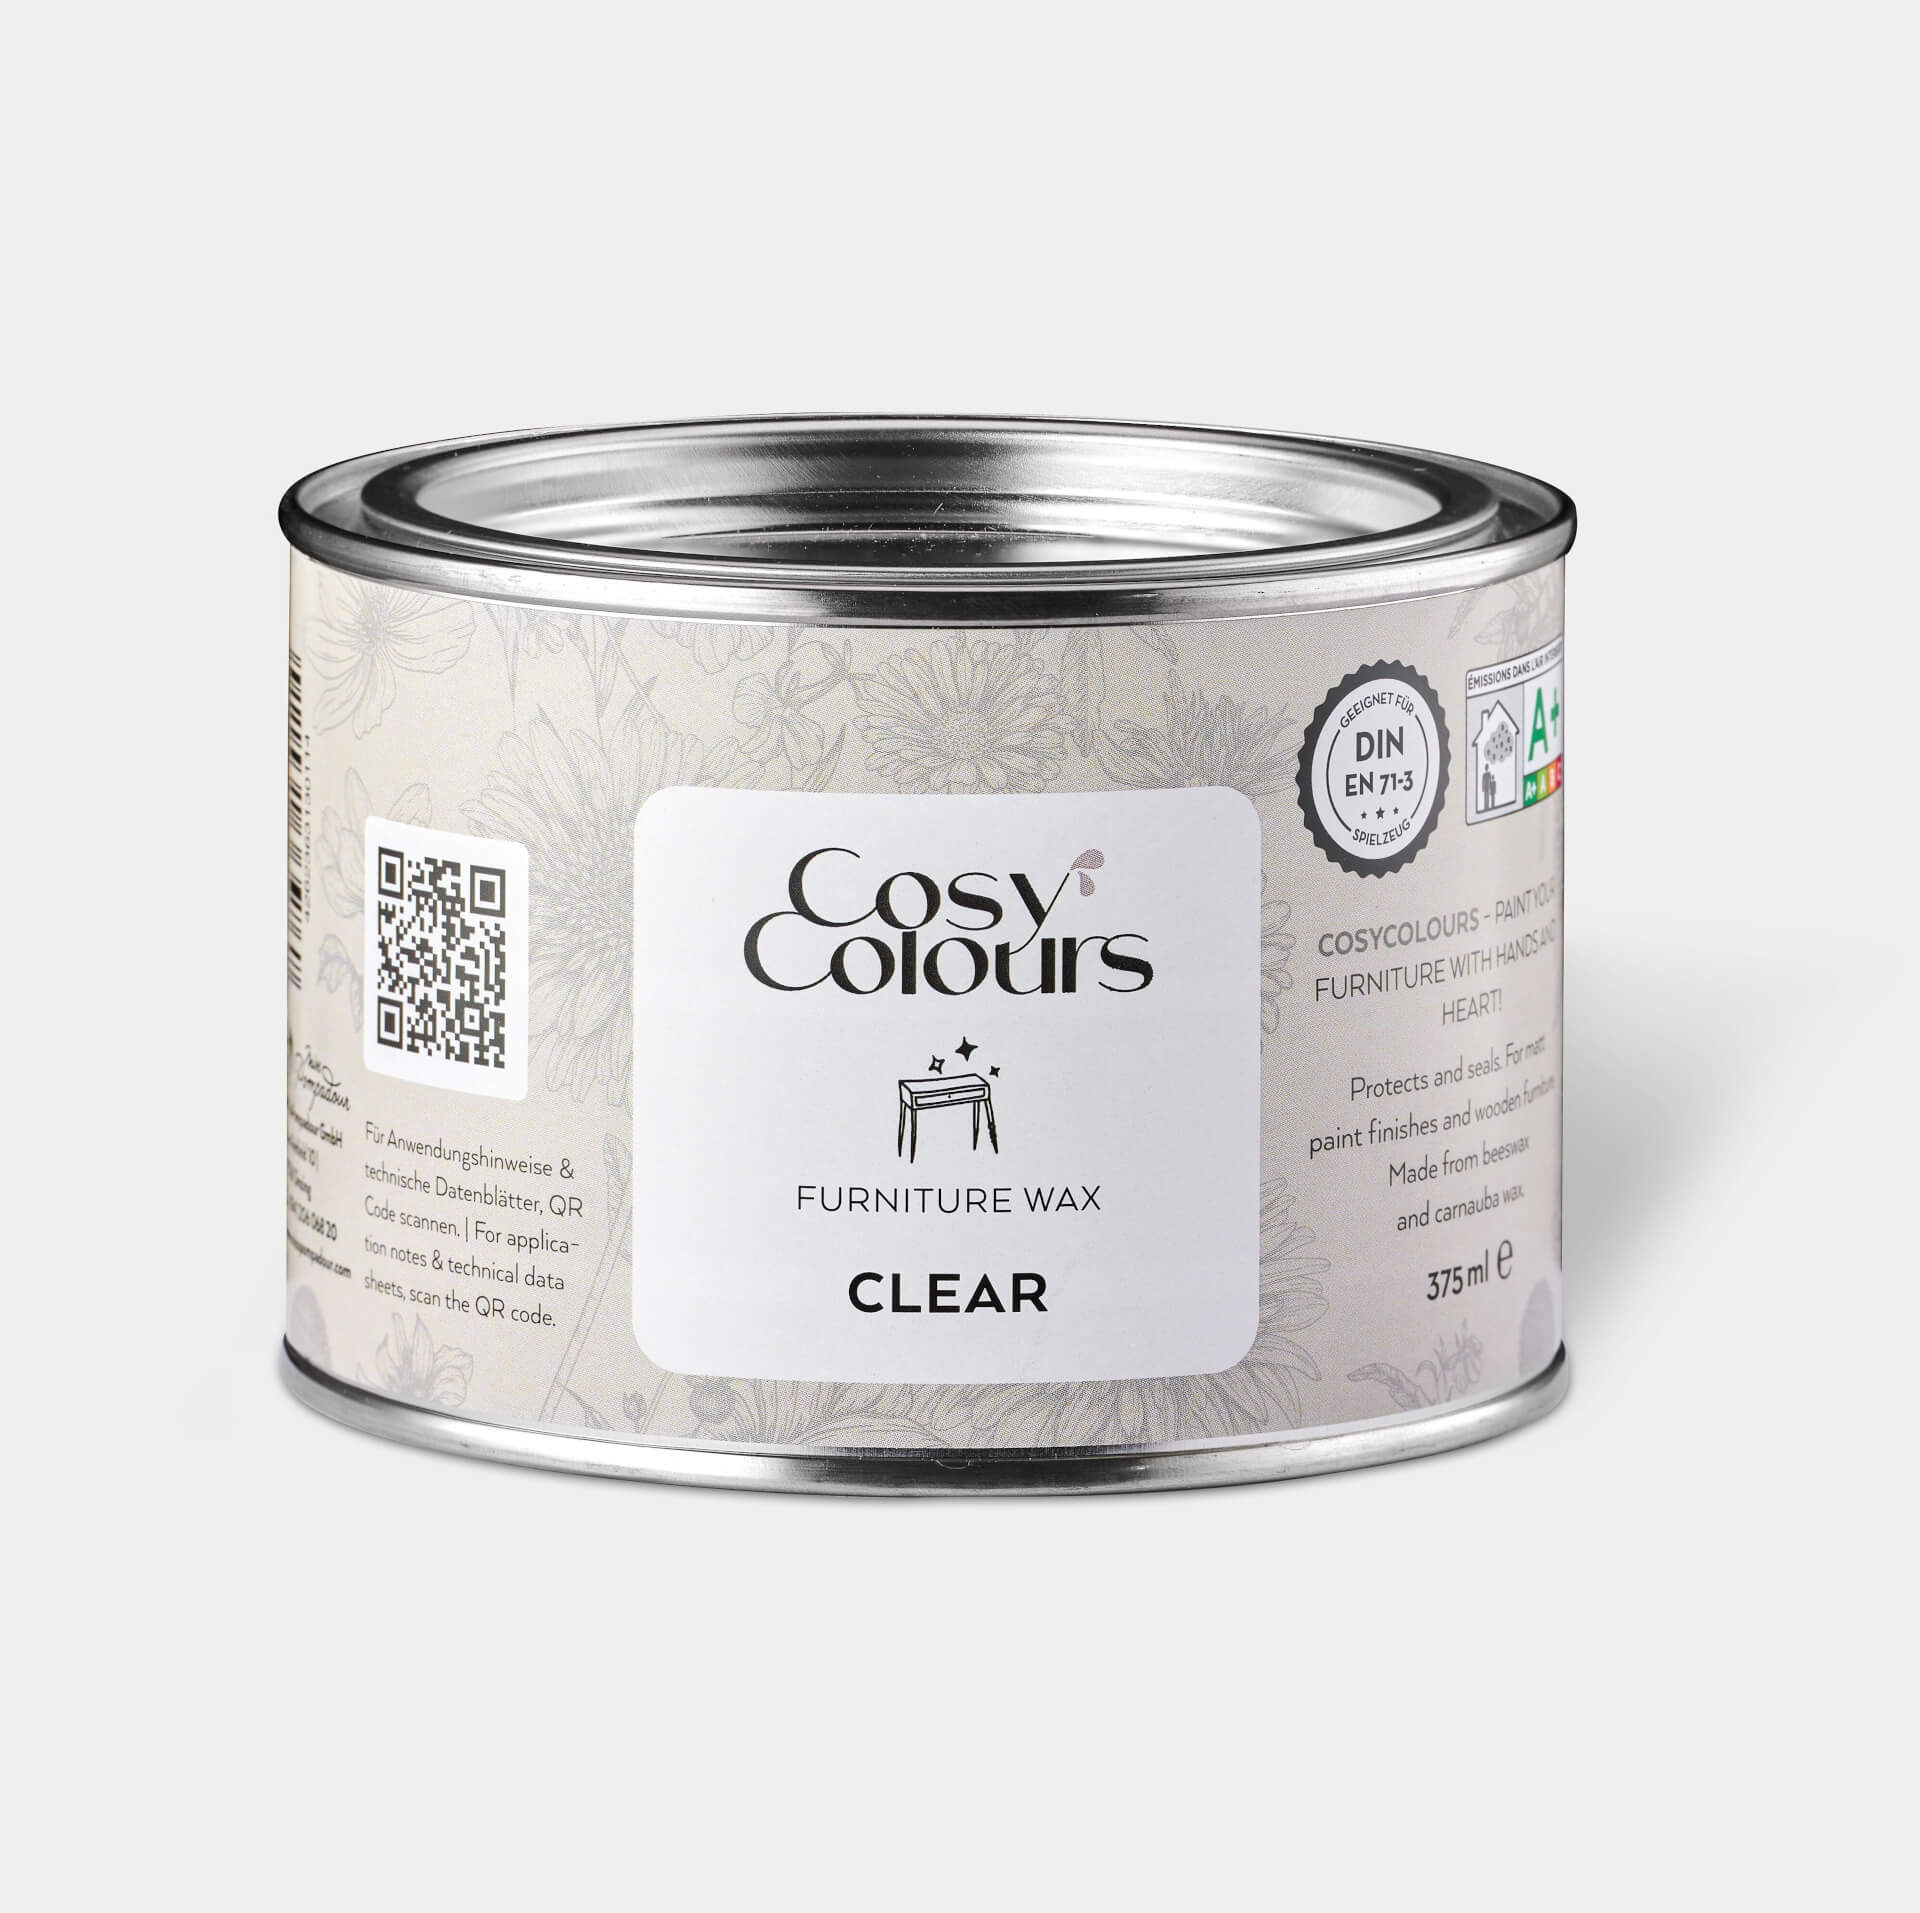 CosyColours Furniture Wax Clear